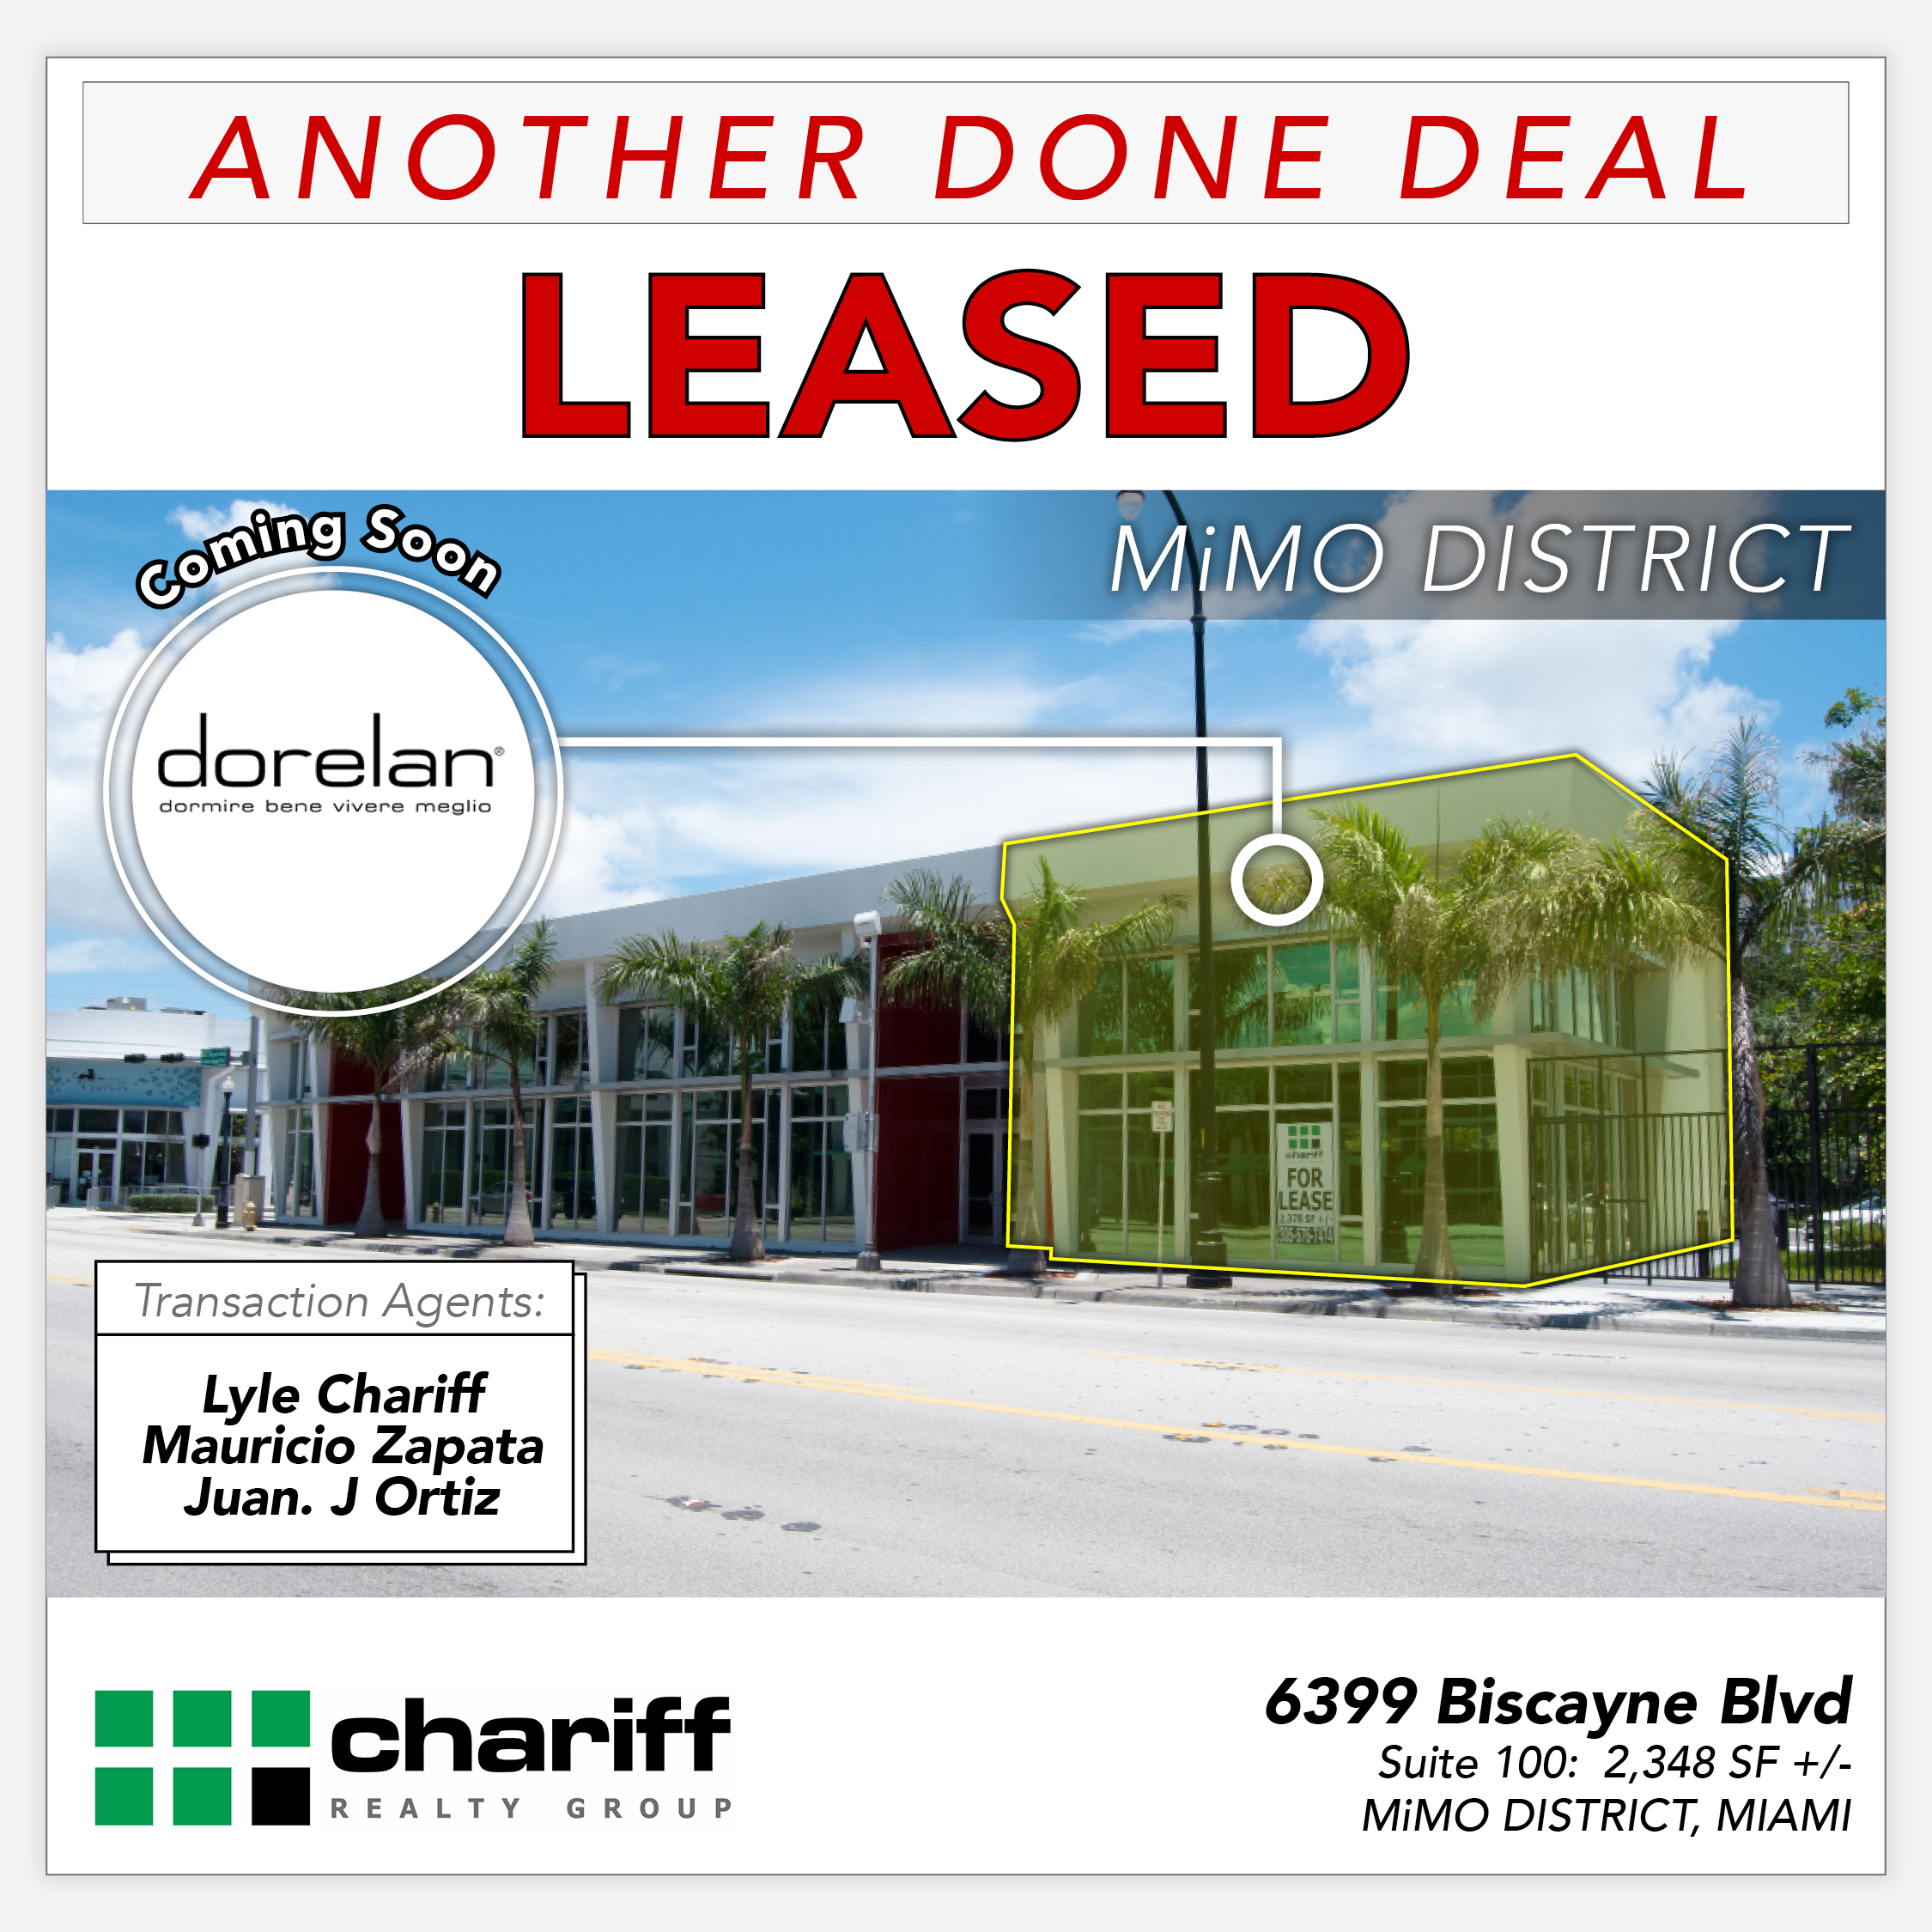 6399 Biscayne Blvd 2- Another Done Deal-Sold-MiMo District - Miami-Florida -33138 -Chariff Realty Group